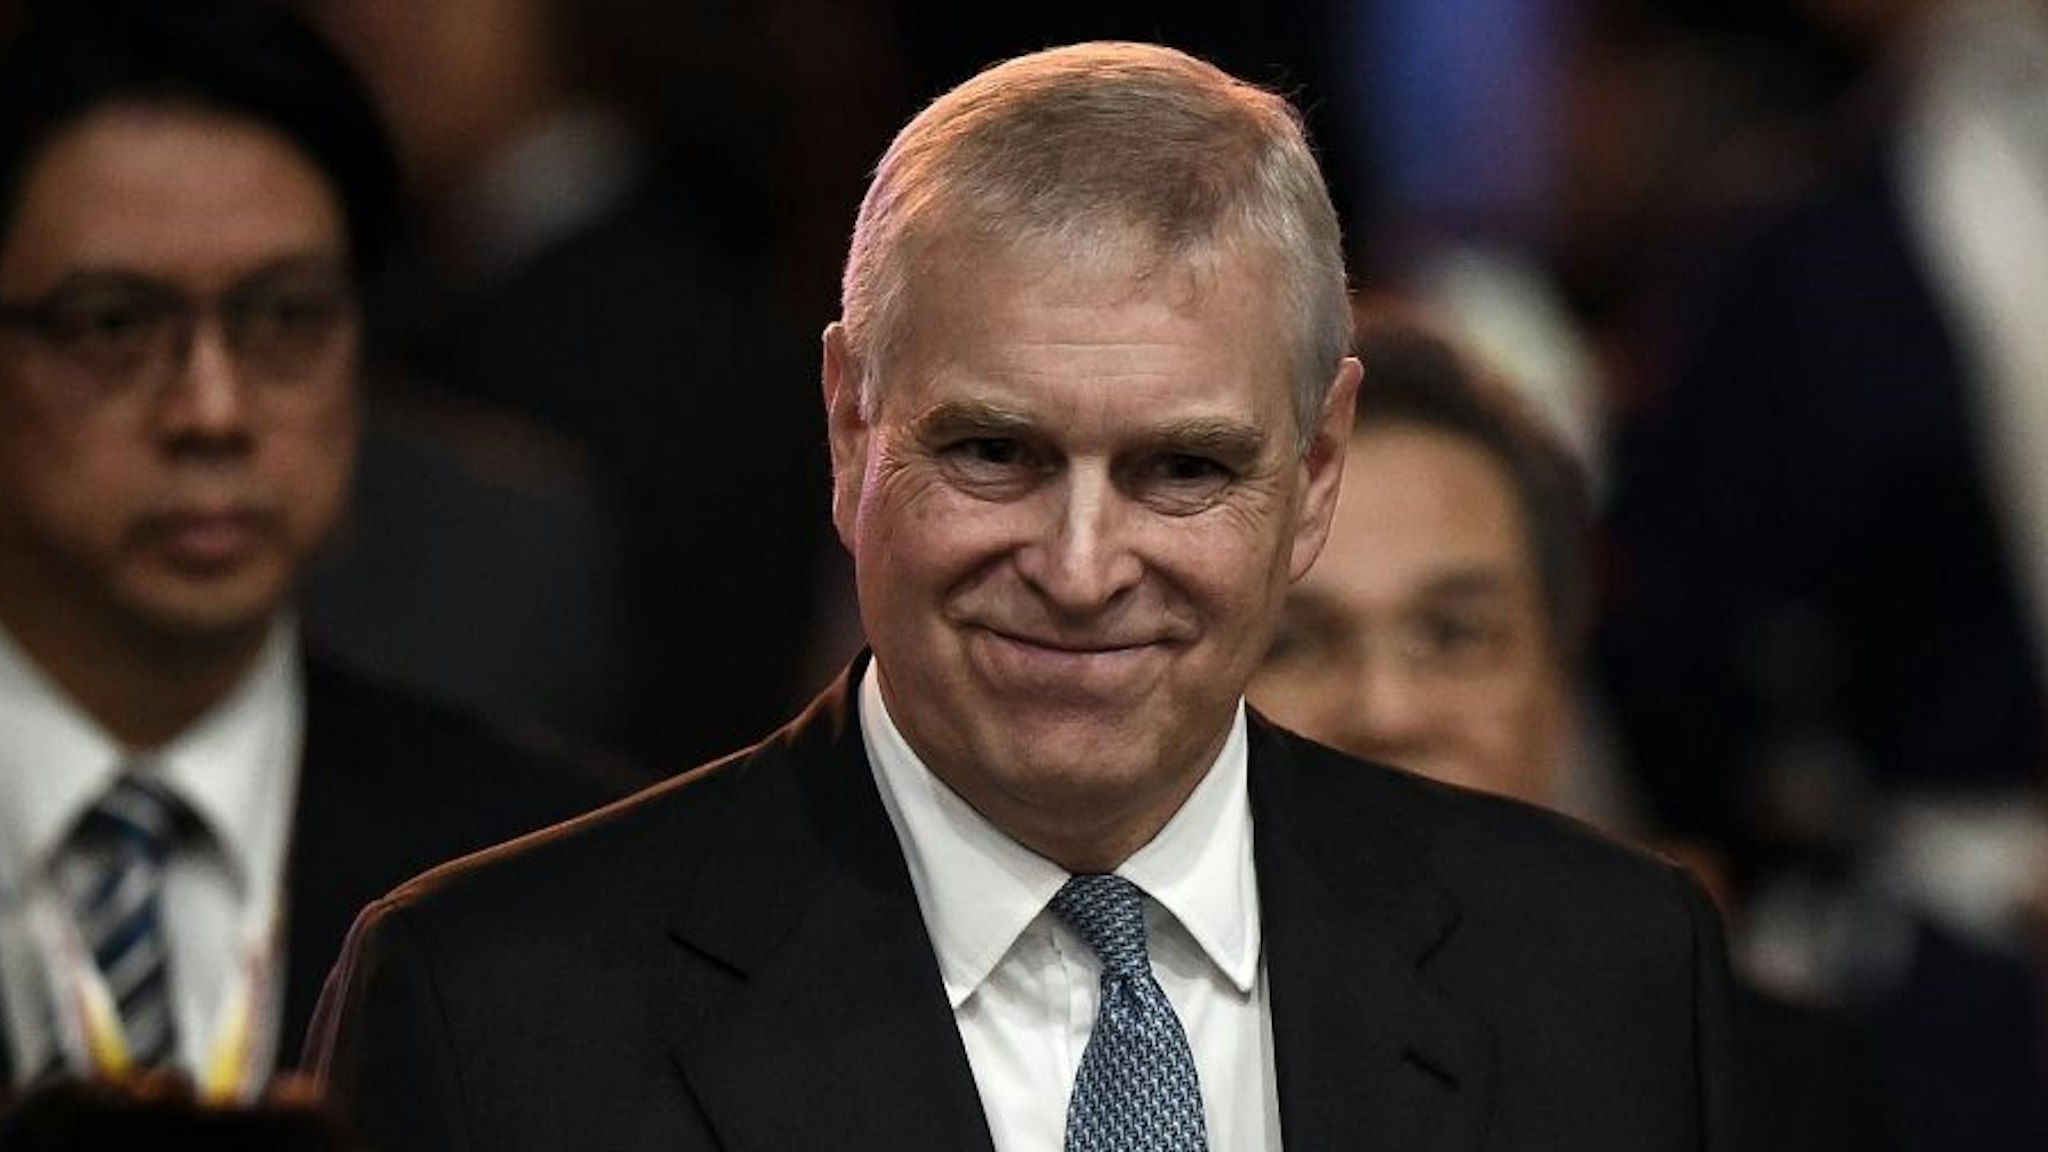 Britain's Prince Andrew, Duke of York leaves after speaking at the ASEAN Business and Investment Summit in Bangkok on November 3, 2019, on the sidelines of the 35th Association of Southeast Asian Nations (ASEAN) Summit. (Photo by Lillian SUWANRUMPHA / AFP) (Photo by